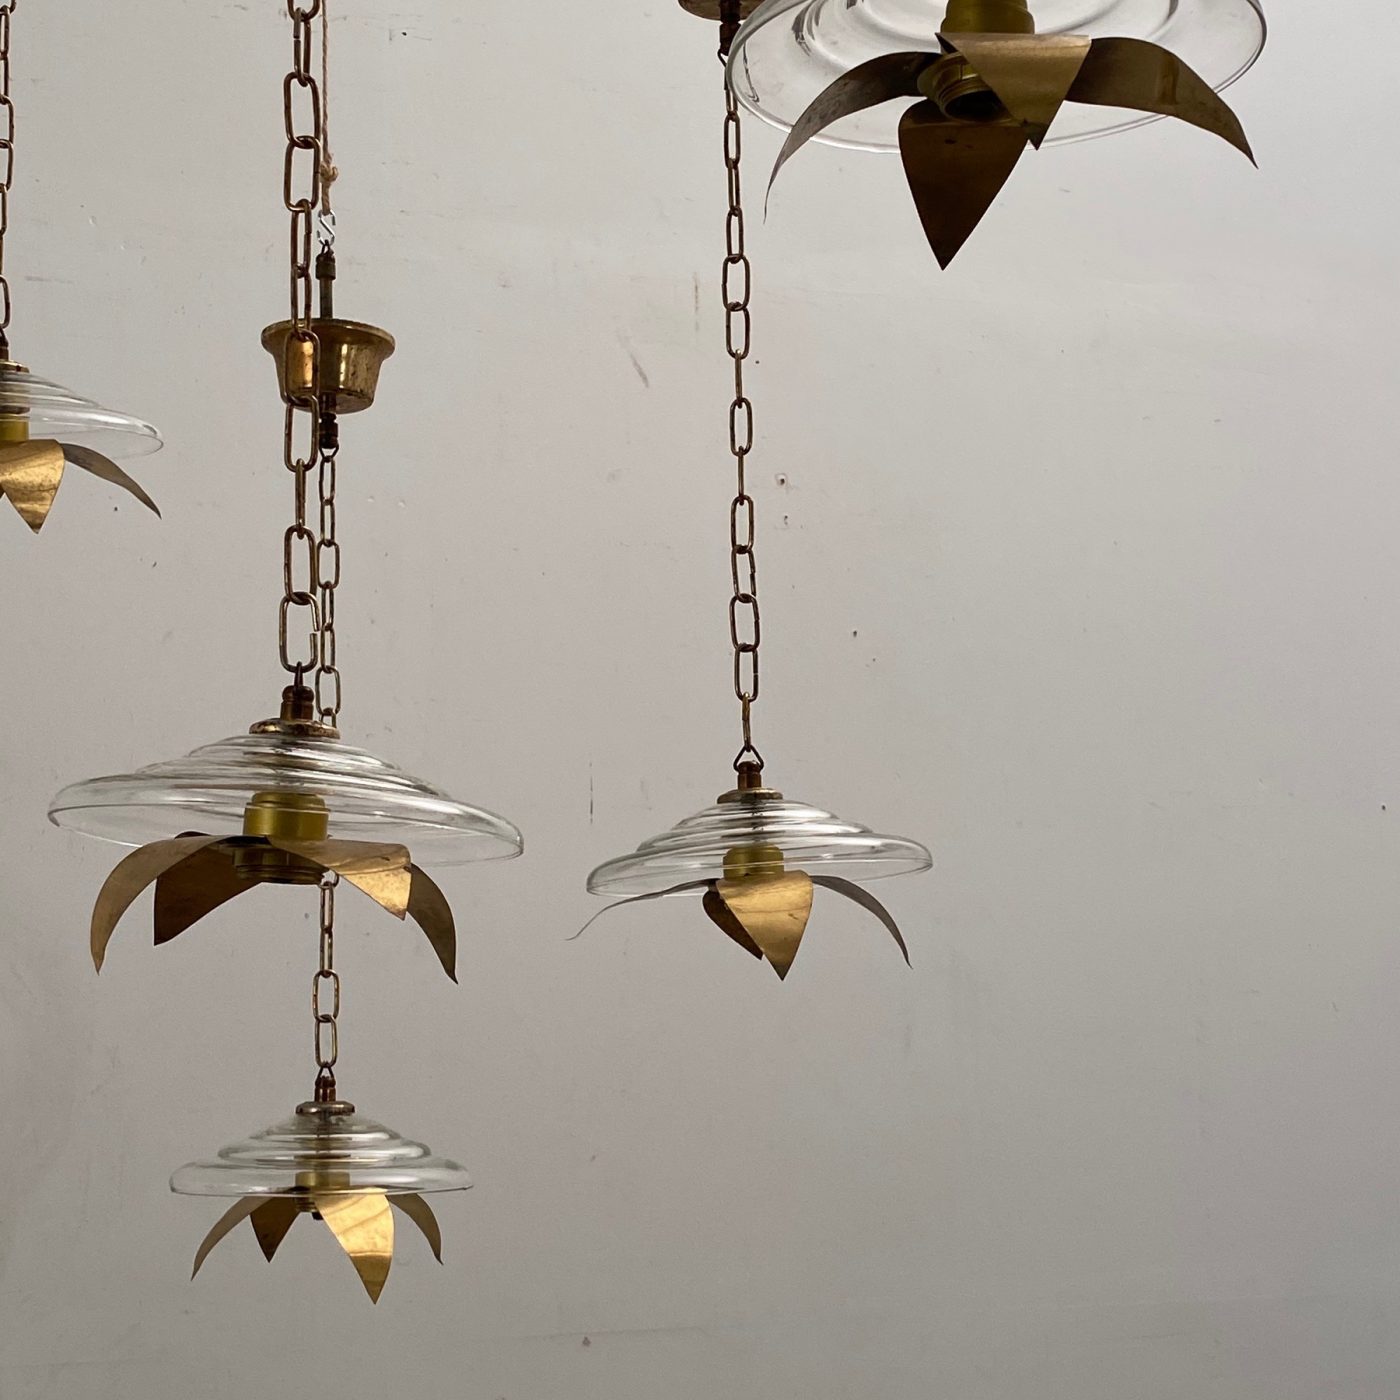 lamps-collection0002